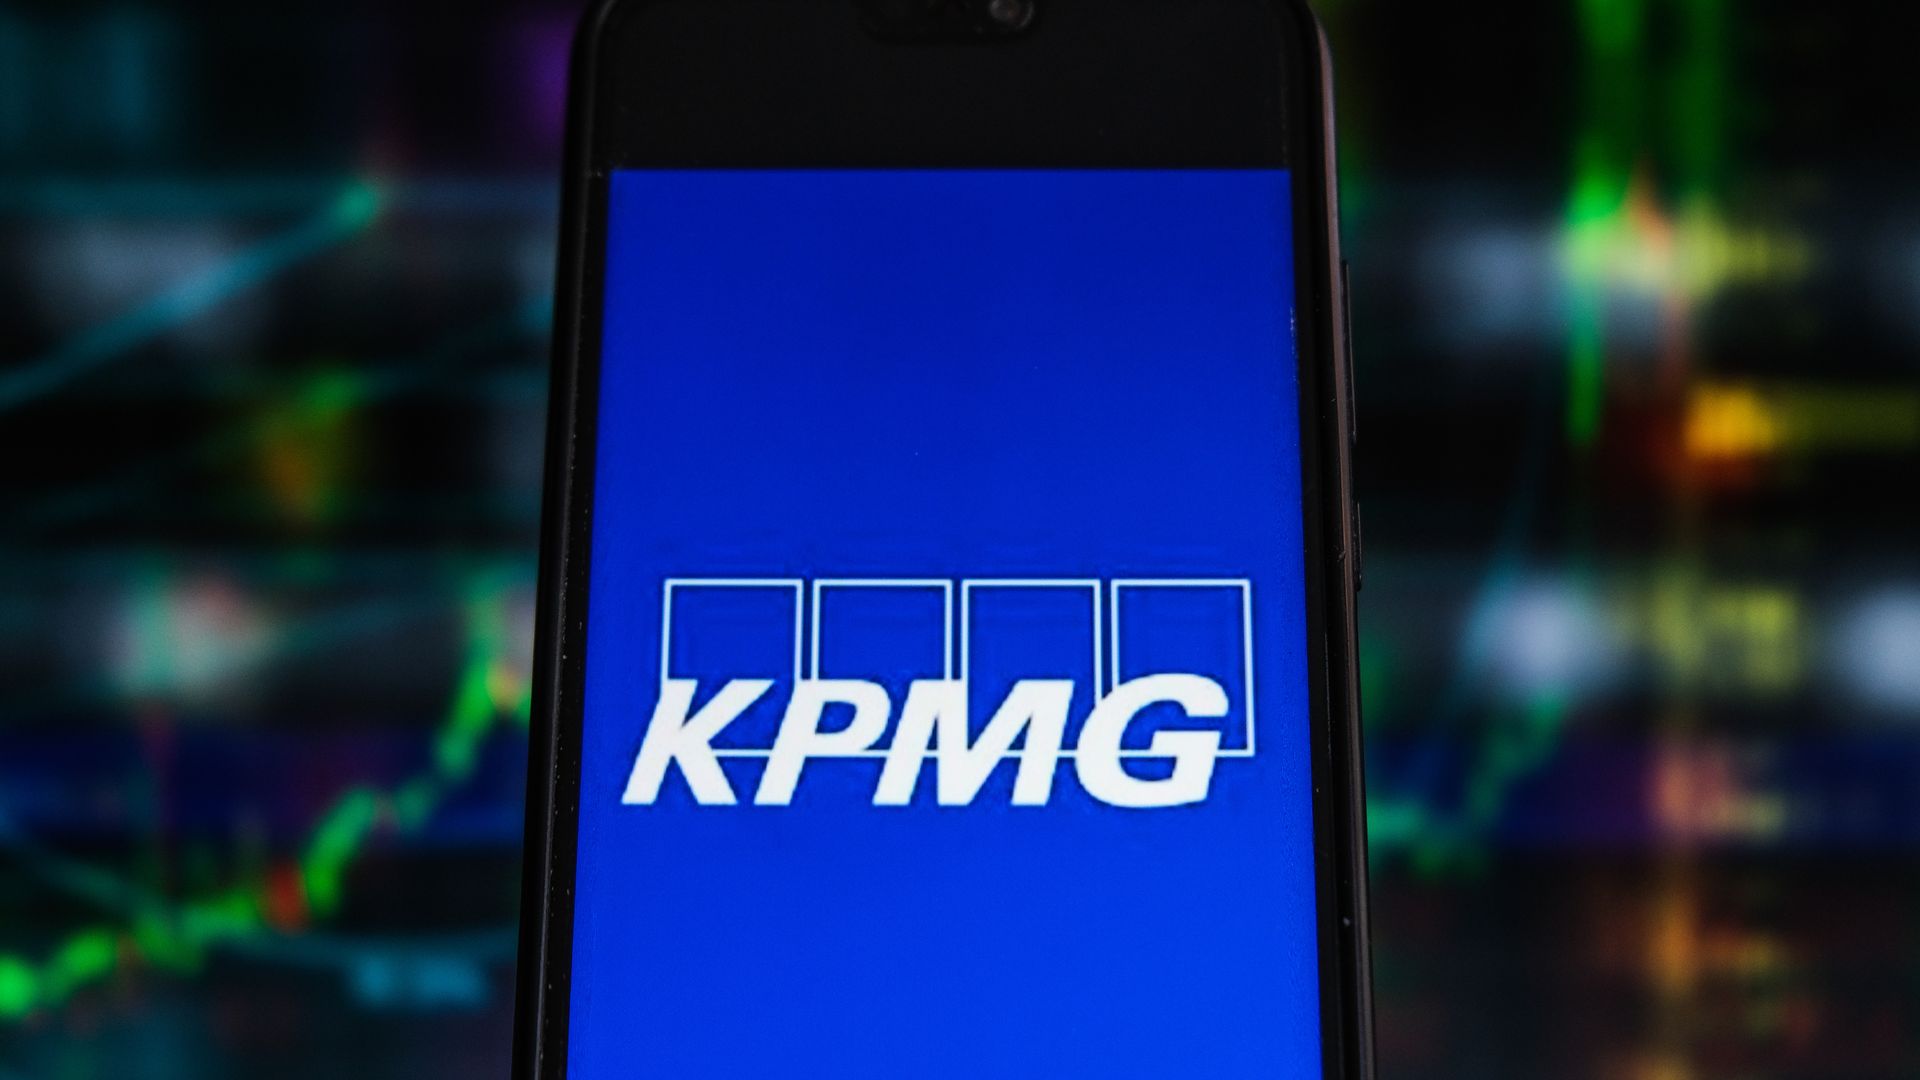 A smart phone is illuminated with the KPMG logo in white letters against a blue background.